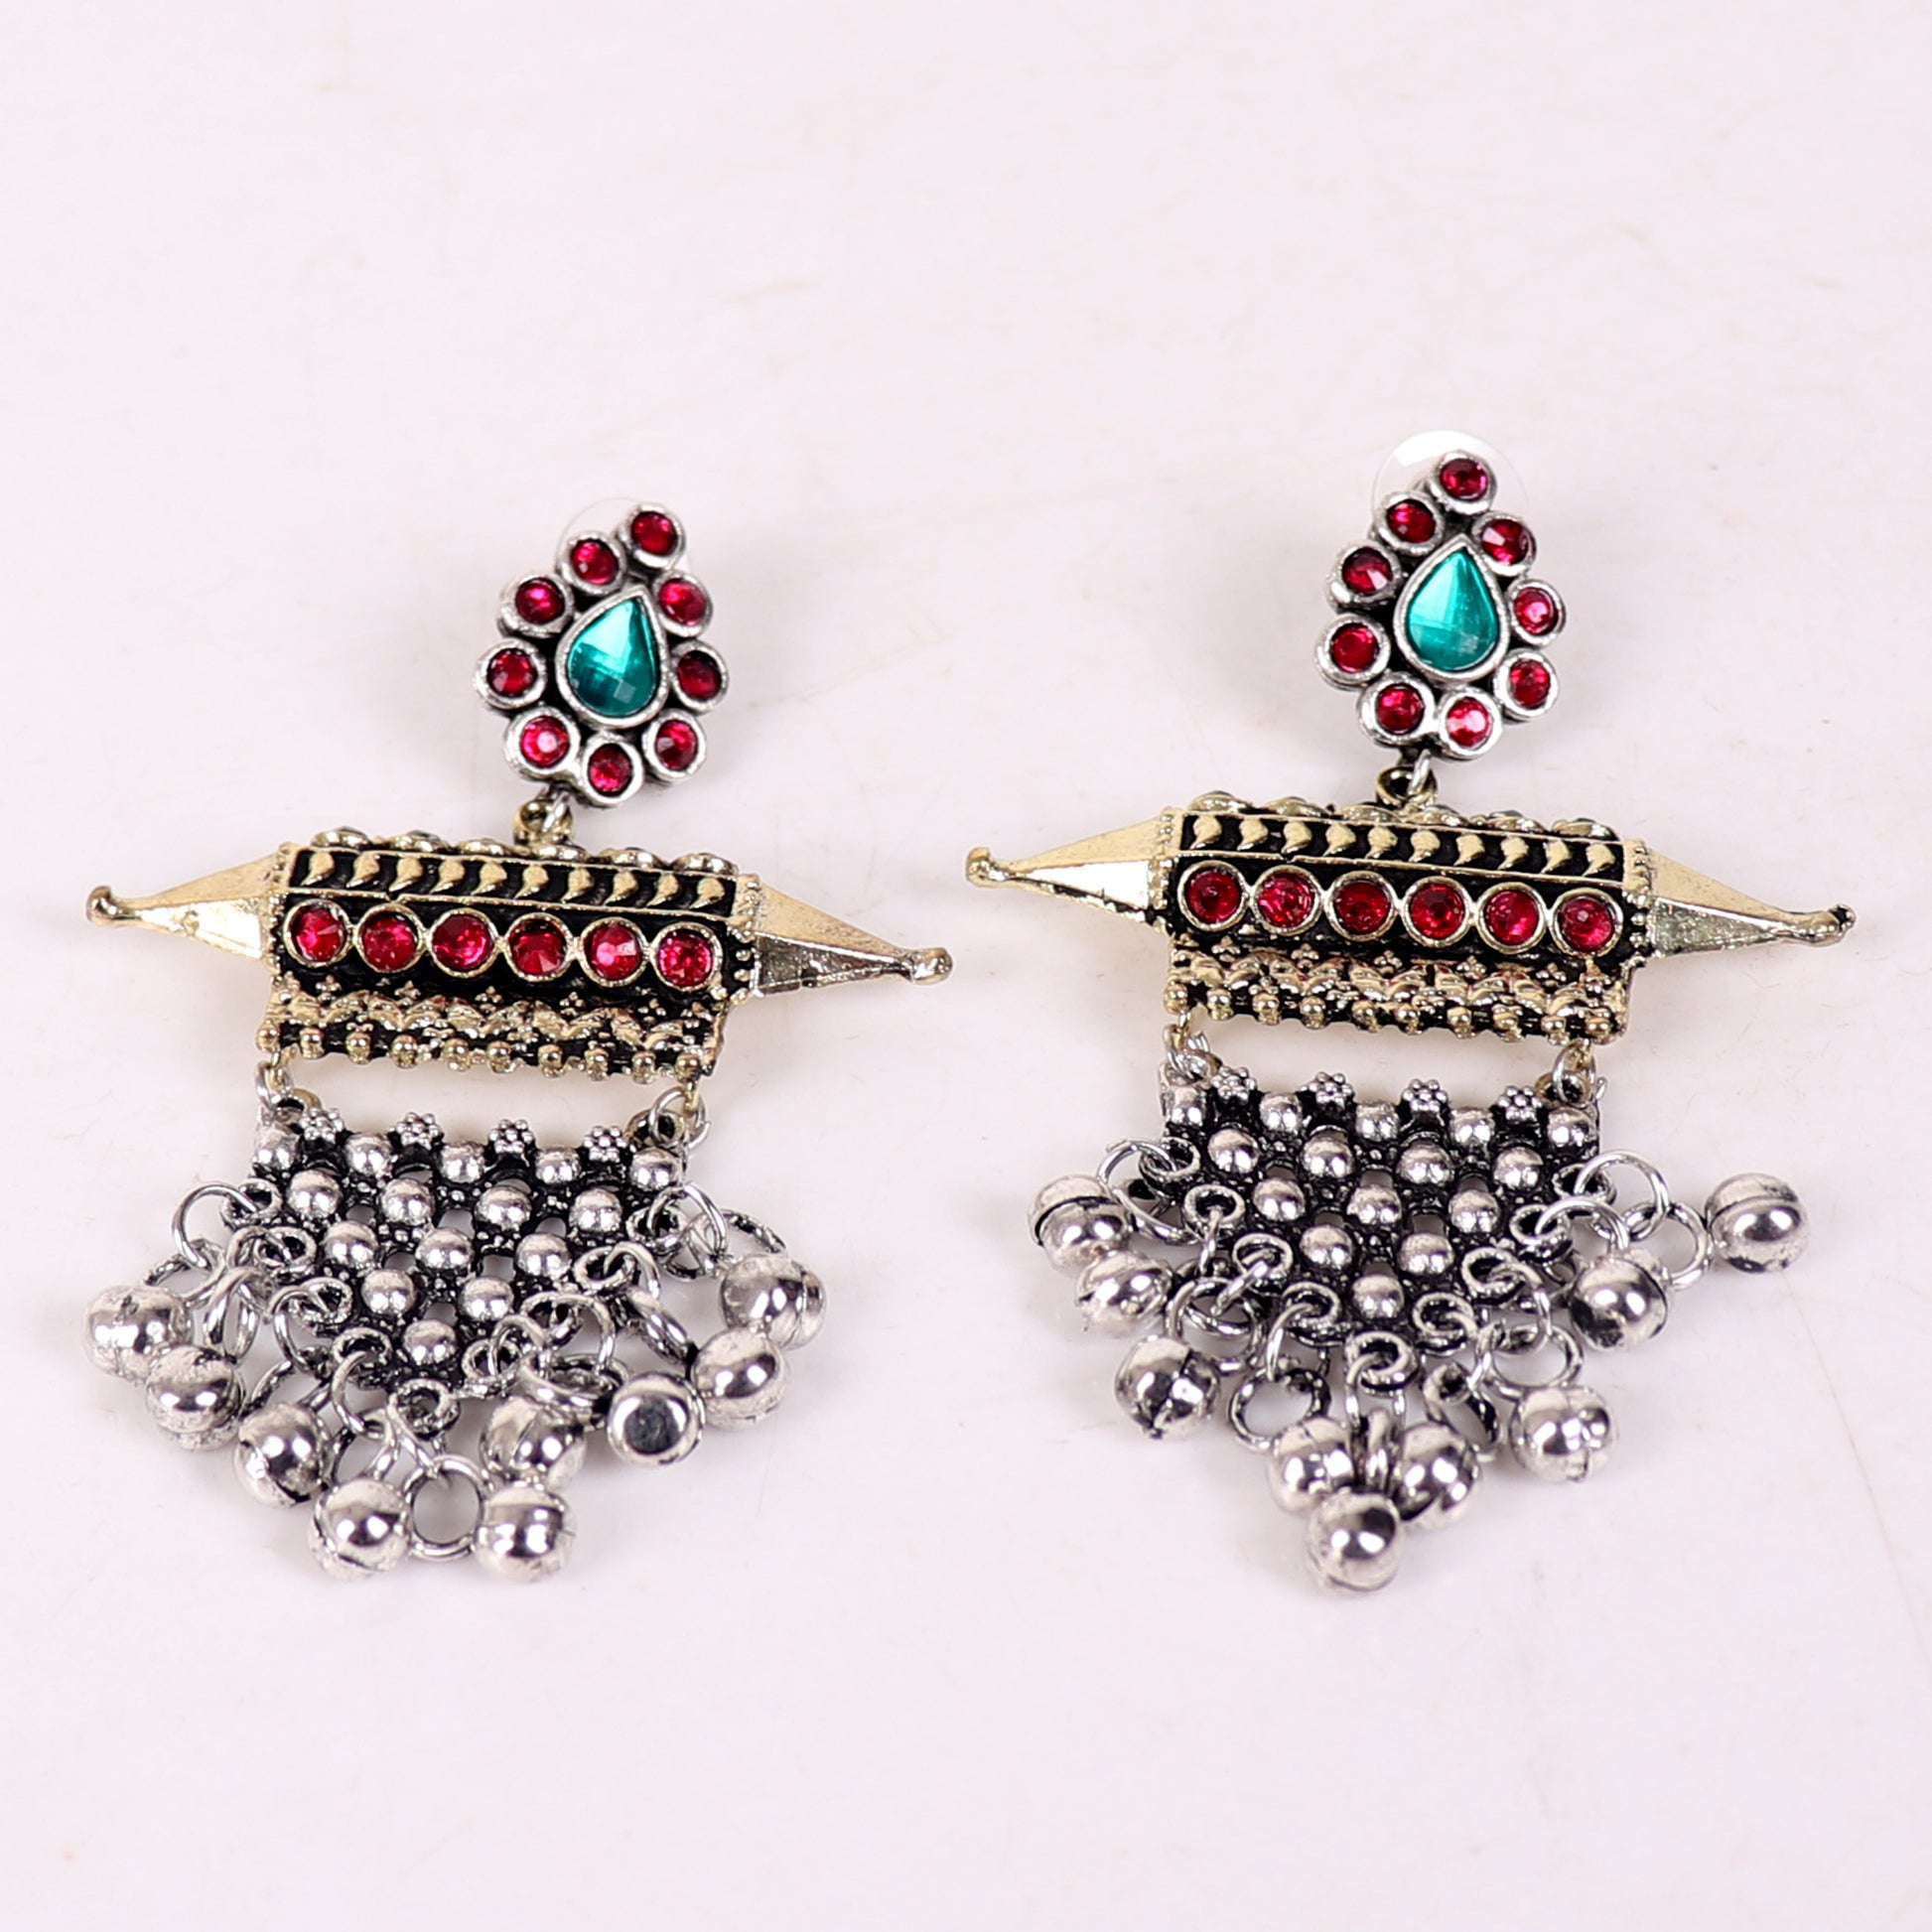 Earrings,Offbeat earrings in Double Tone (with Red and Green Rhinestones) - Cippele Multi Store